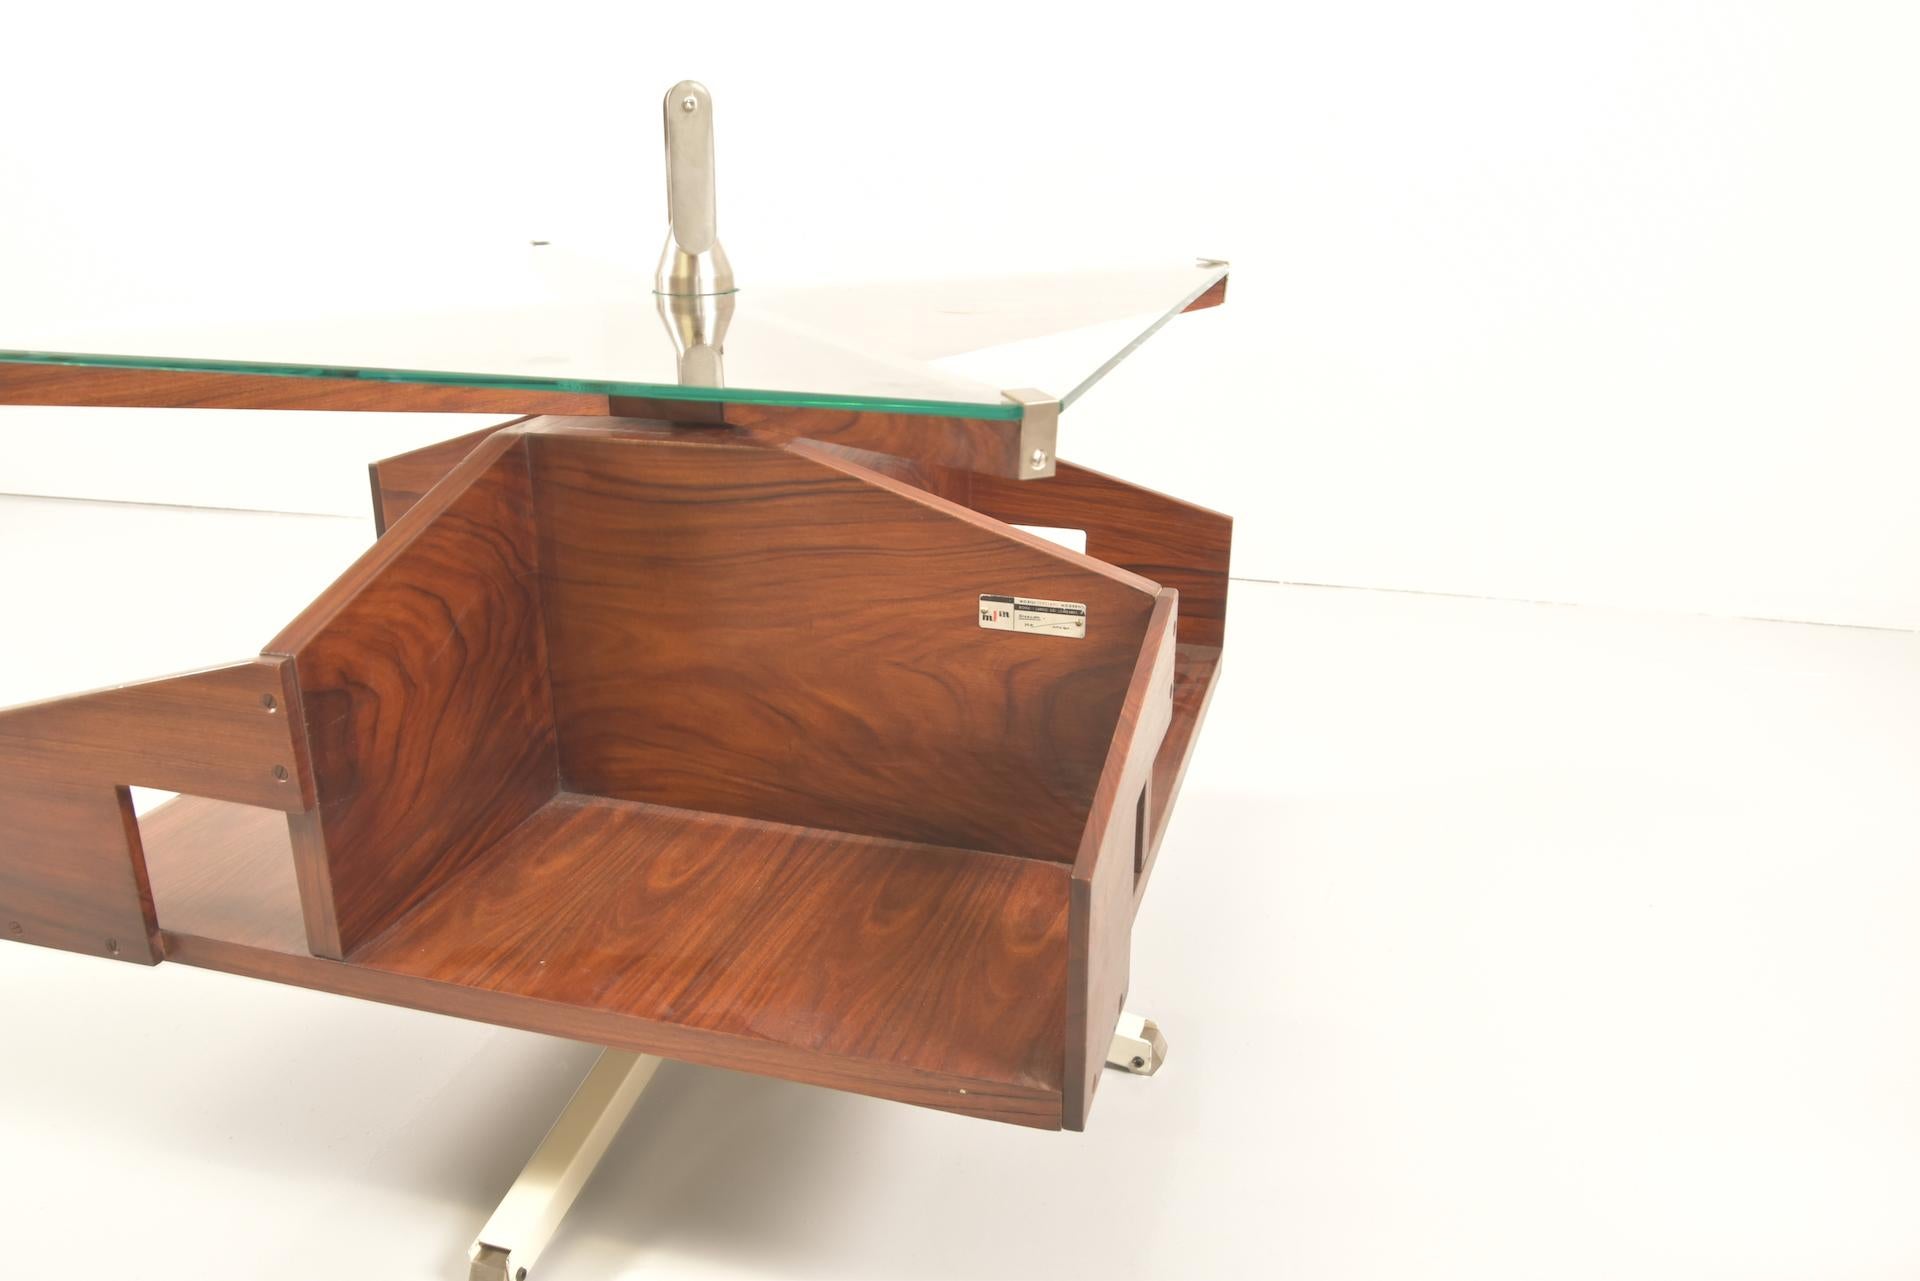 20th Century Ico Parisi Midcentury Rosewood Italian Coffee Table with Rotating Shelves, 1950s